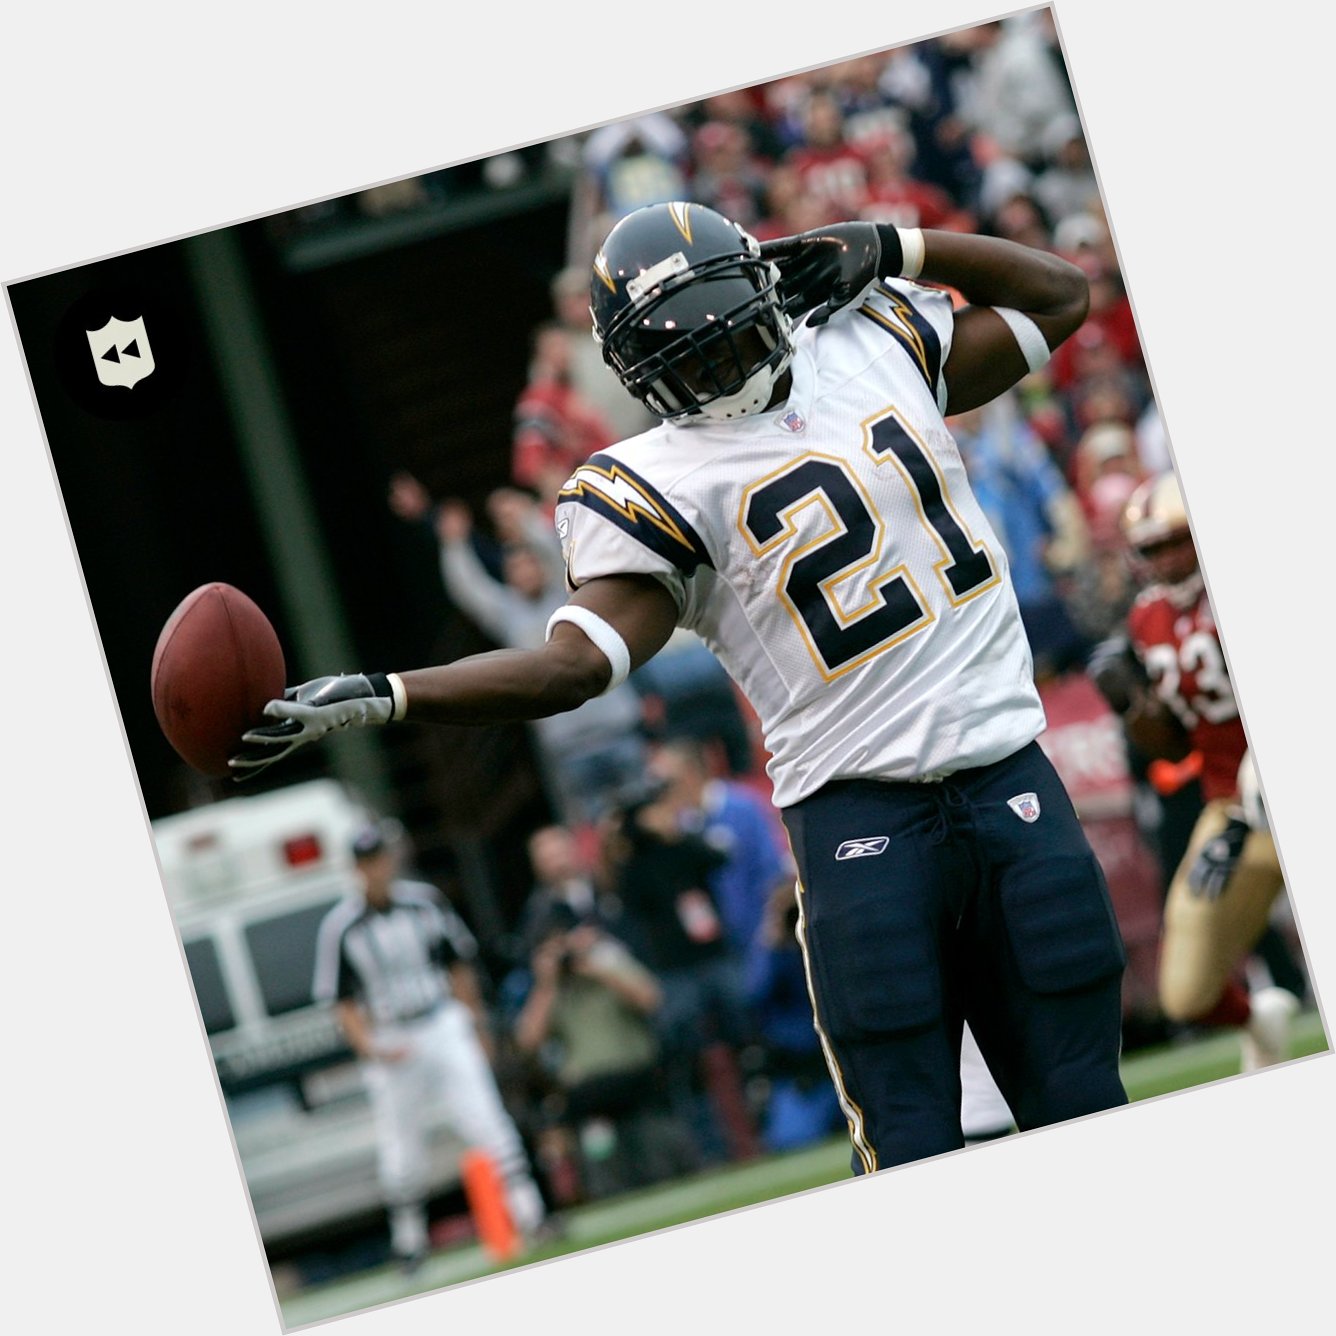 Your favorite RB s favorite RB.

Happy 42nd birthday to LaDainian Tomlinson! (via 